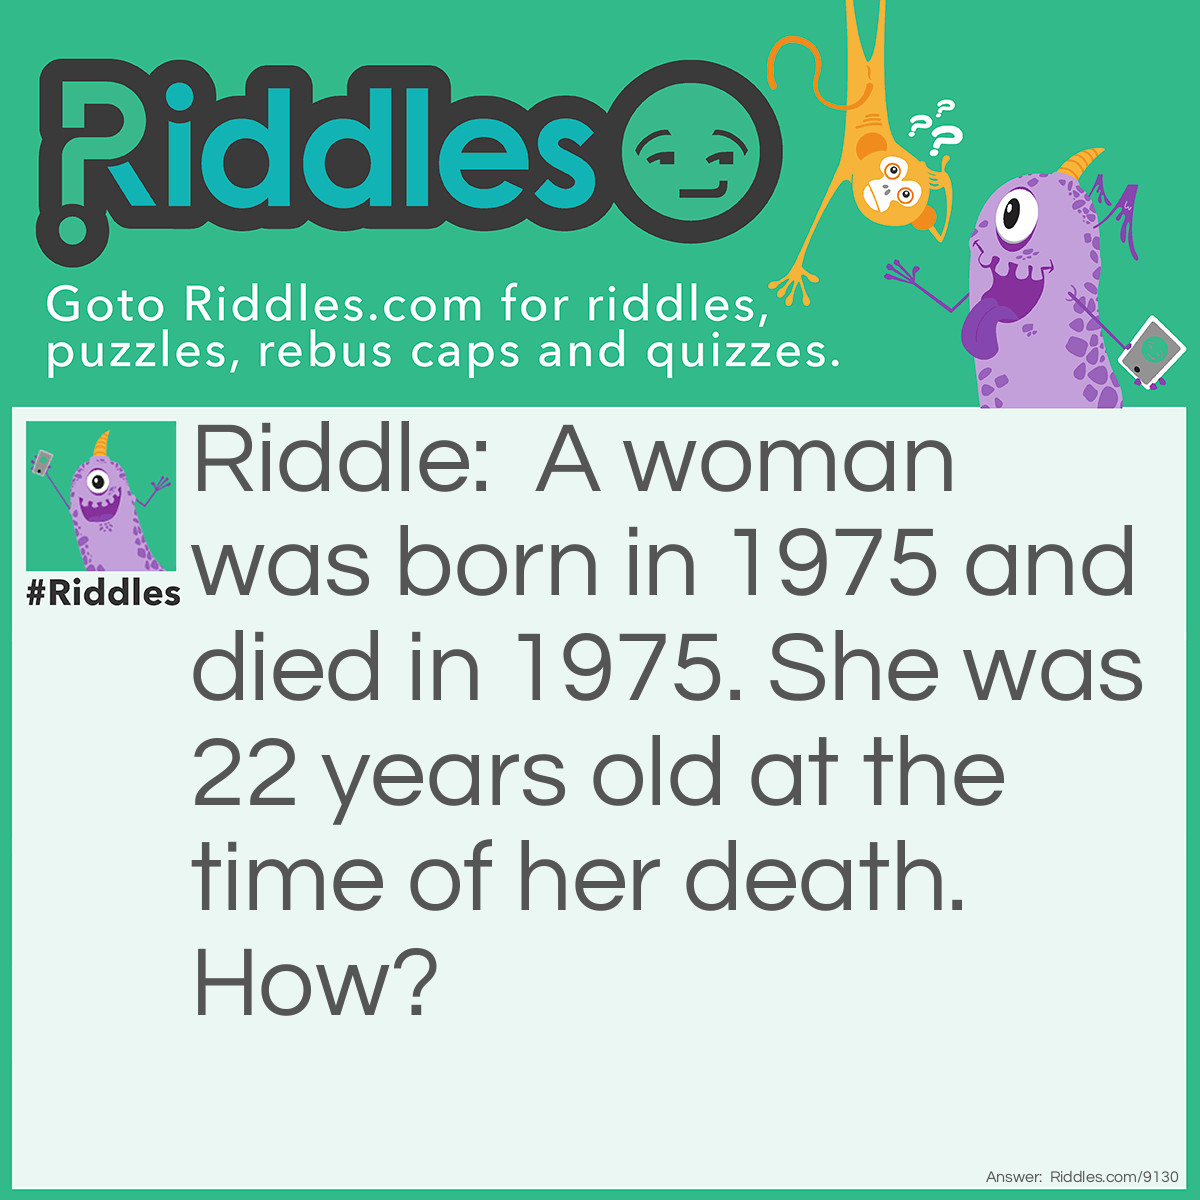 Riddle: A woman was born in 1975 and died in 1975. She was 22 years old at the time of her death. How? Answer: She was born in hospital room #1975.